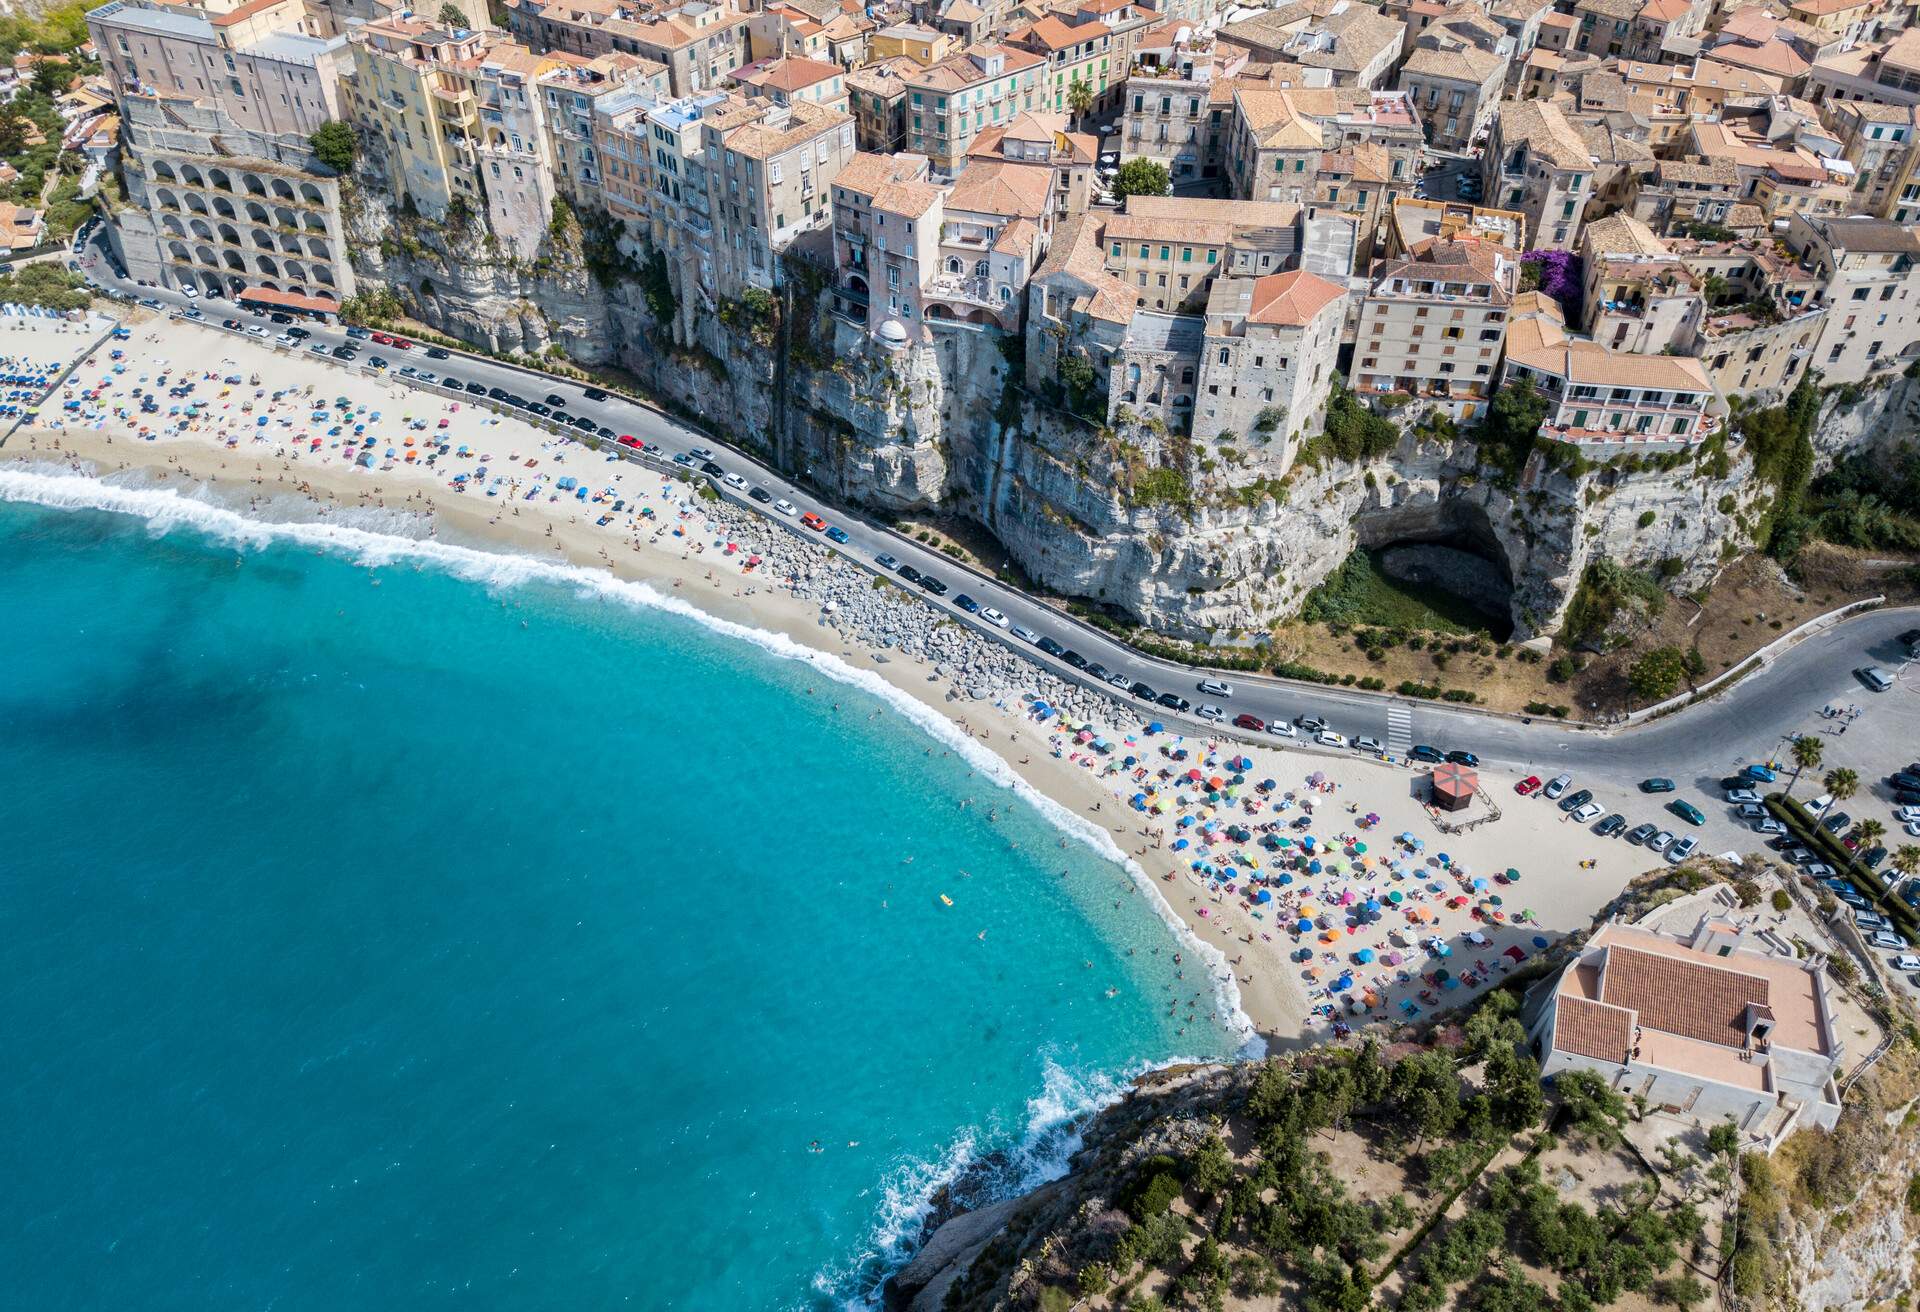 DEST_ITALY_CALABRIA_TROPEA_AERIAL_GettyImages-831060546